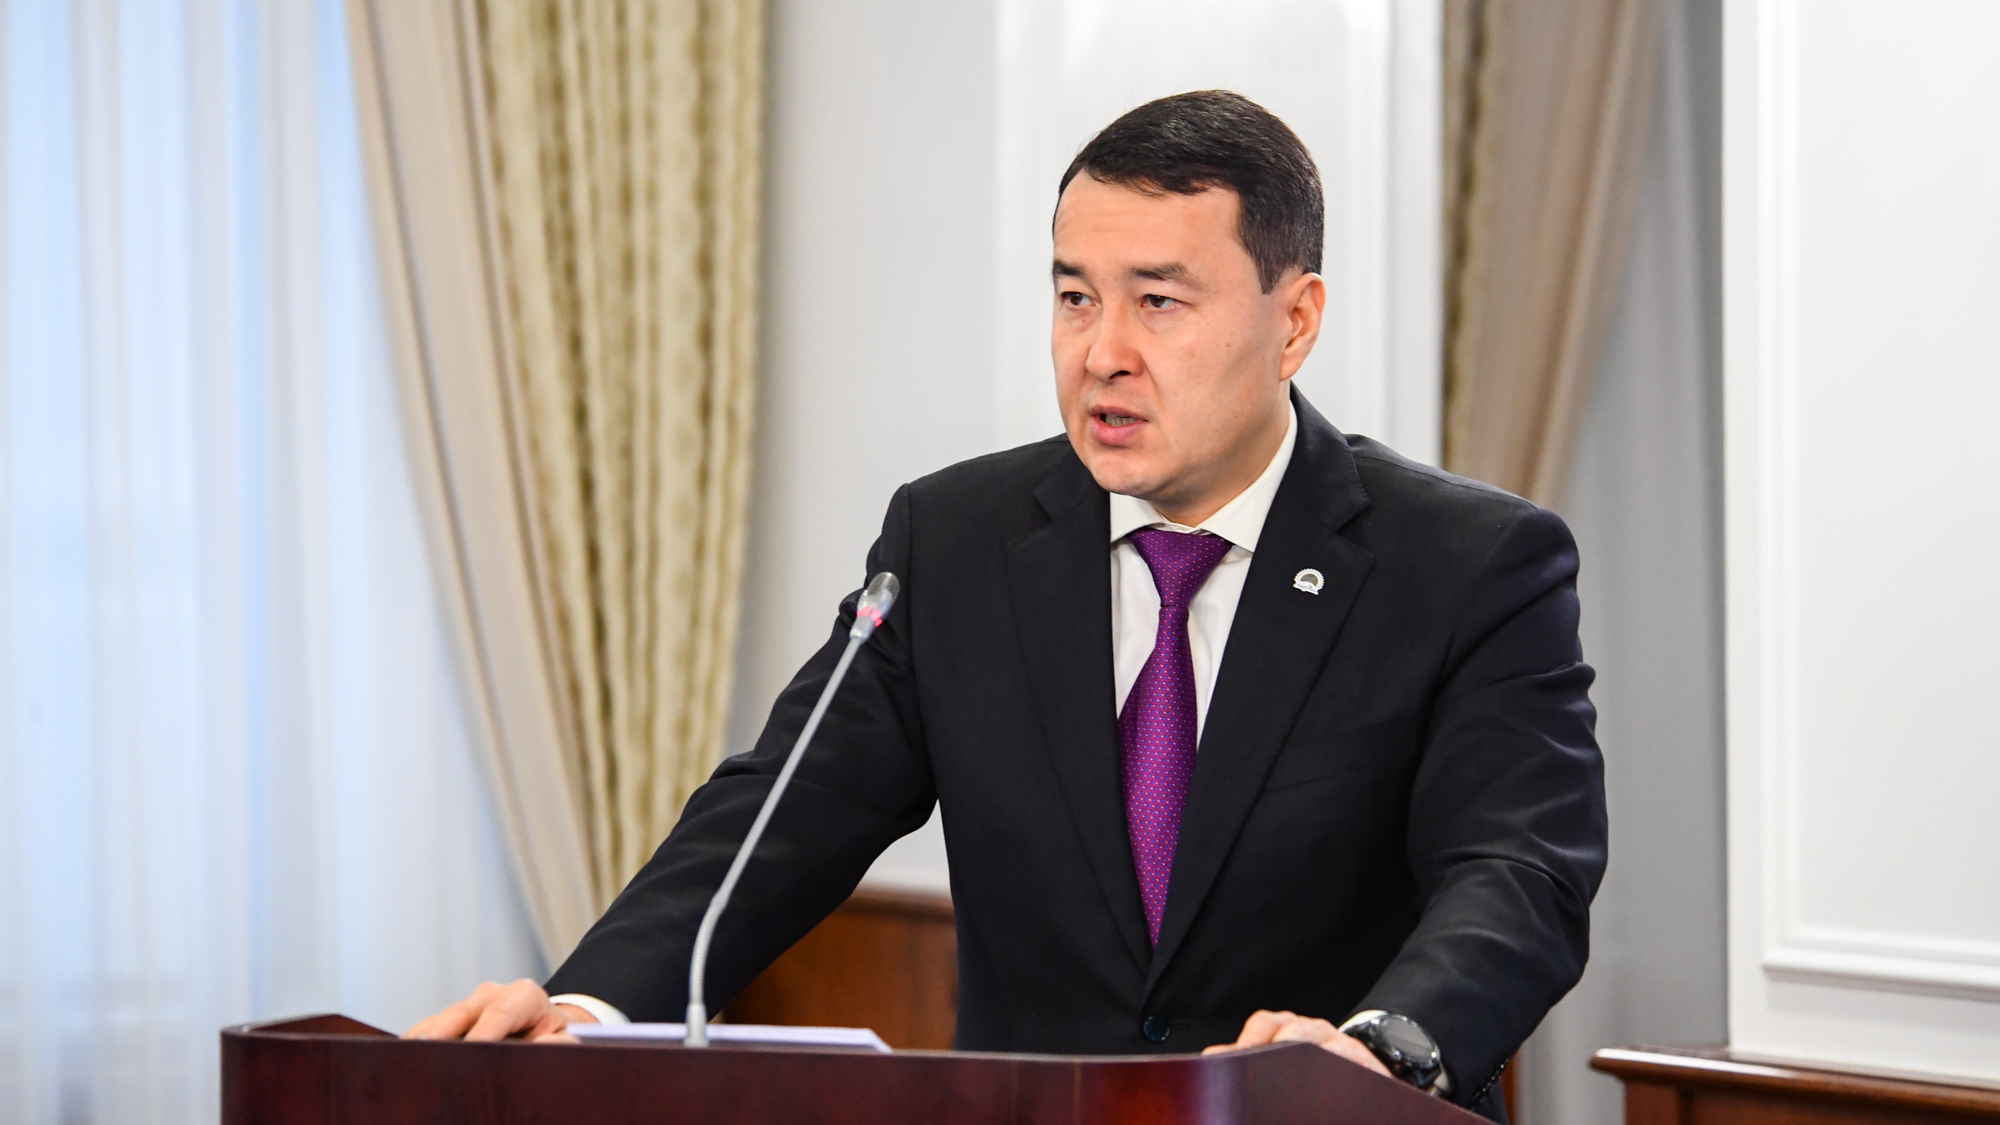 Tax amnesty for SMEs and individuals led to payment of 23 billion tenge of tax debts — Smailov